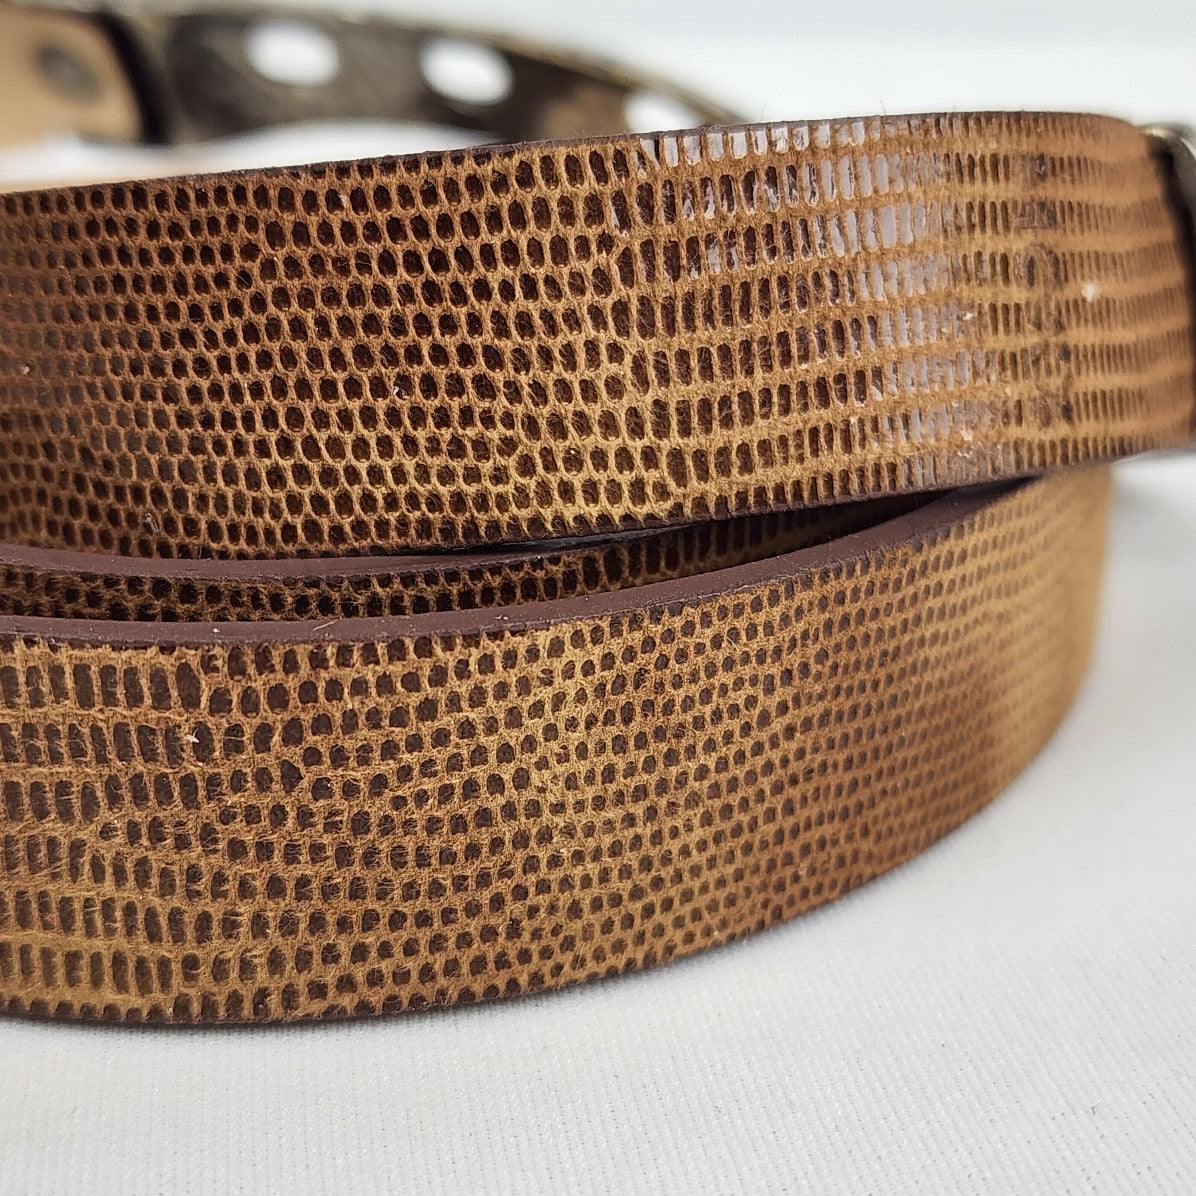 Mexx Brown Silver Buckle Leather Belt Size M/L